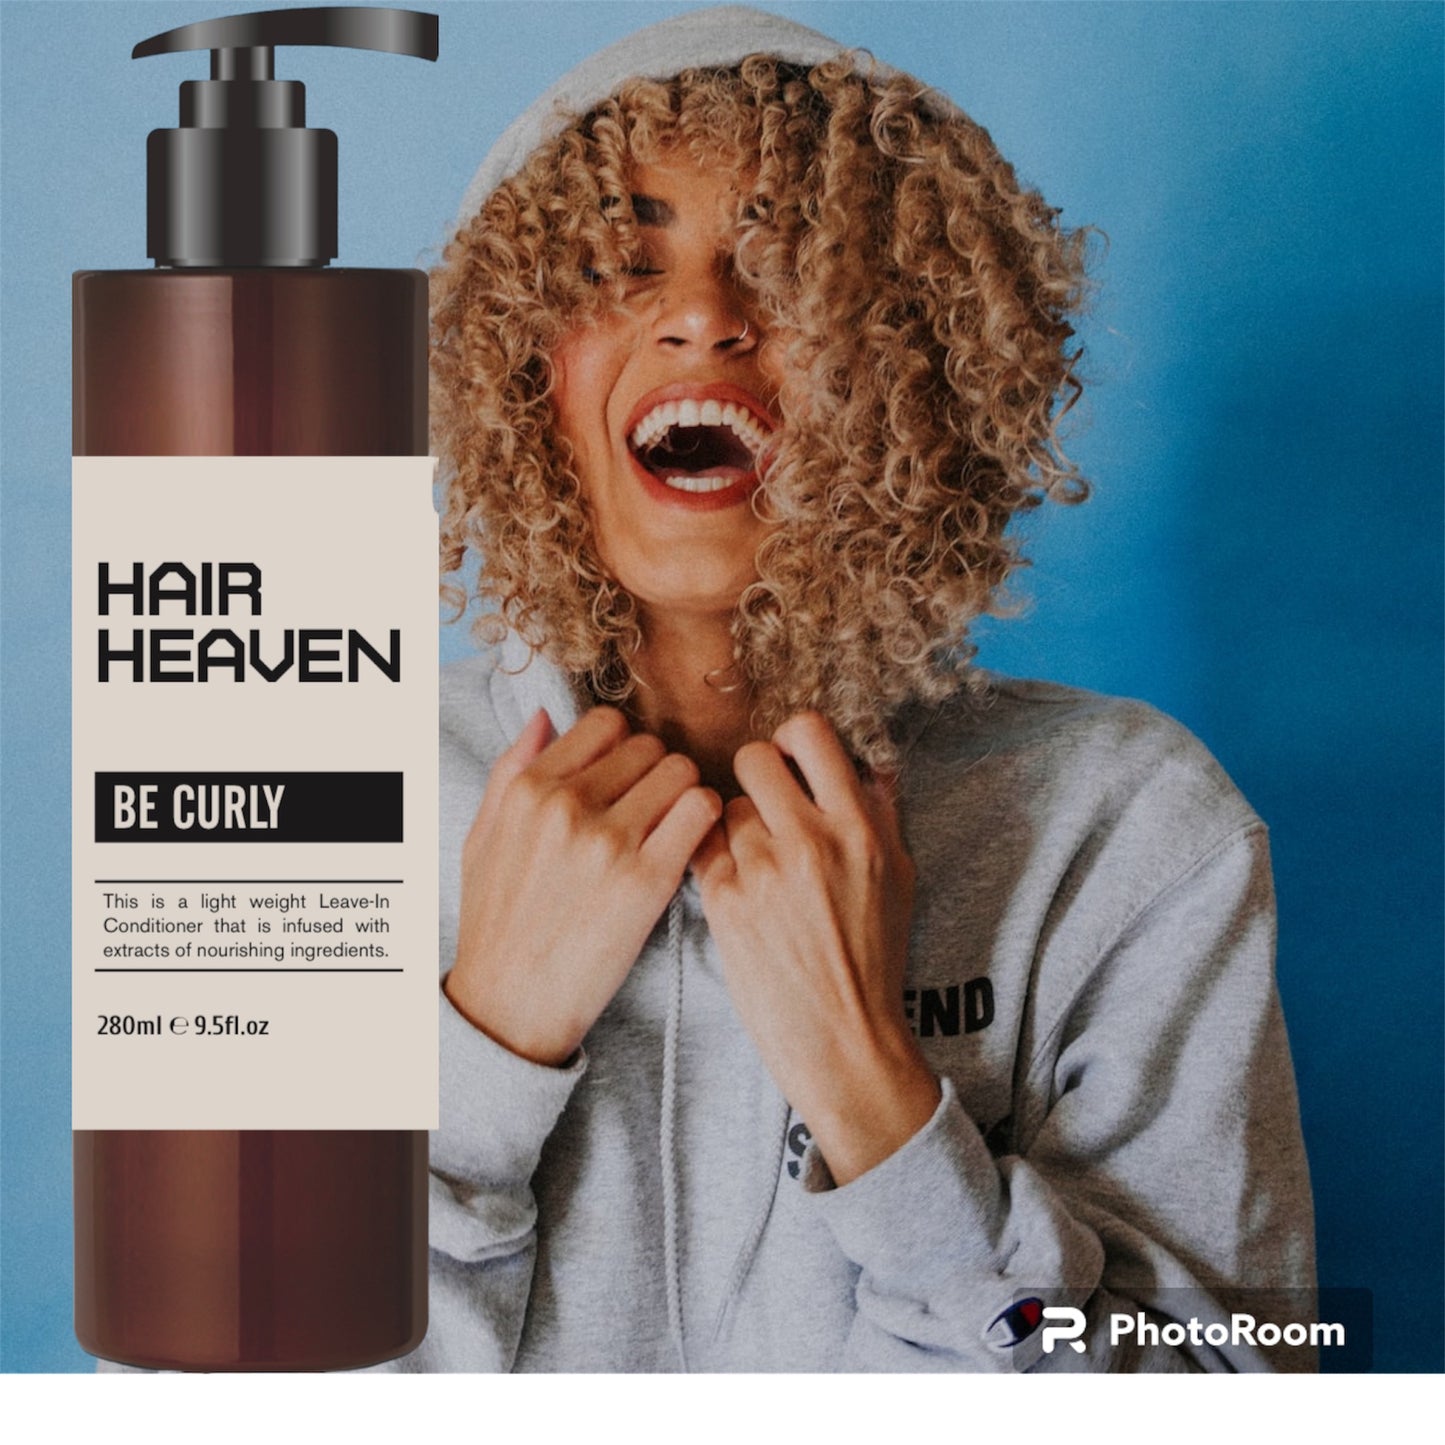 Hair Heaven Be Curly Leave-In Conditioner 280ml